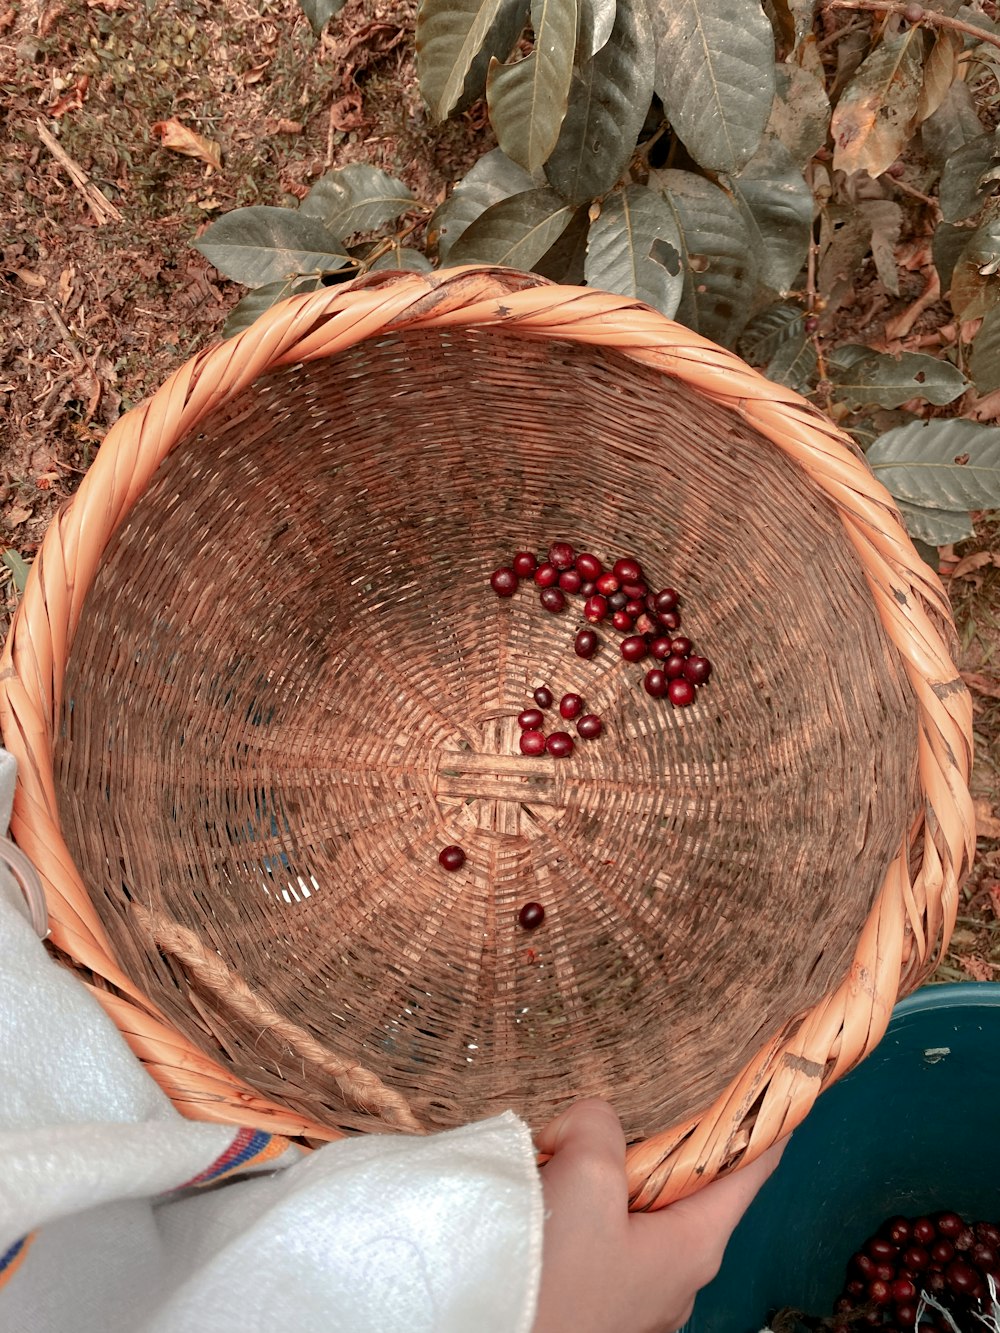 a person holding a basket with berries in it